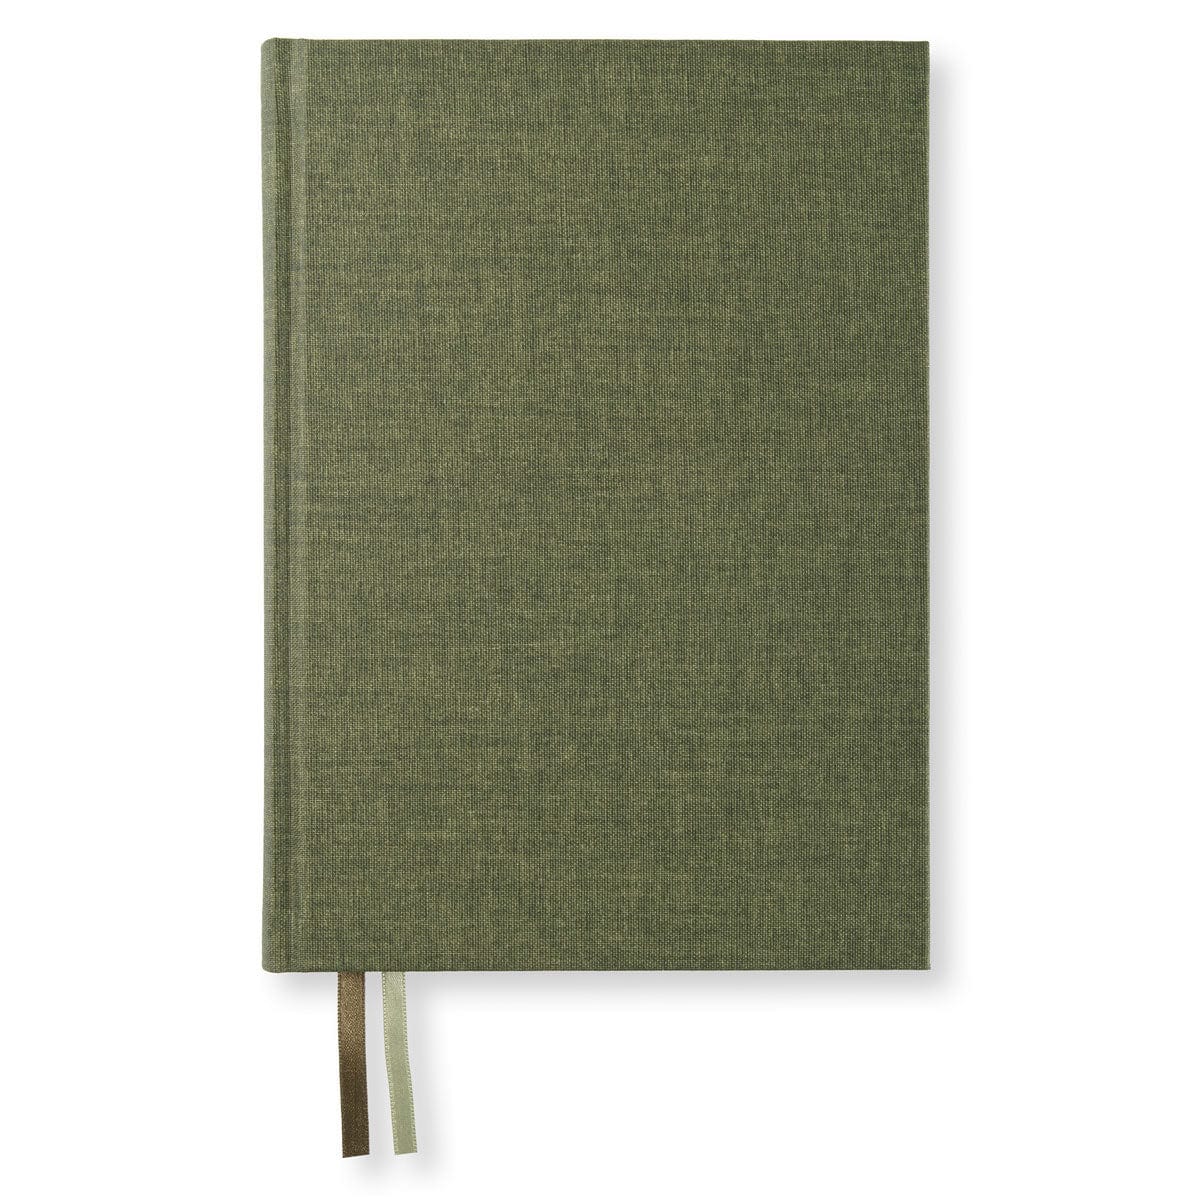 PaperStyle Paperstyle NOTEBOOK A5 176p. Dotted Khaki Green